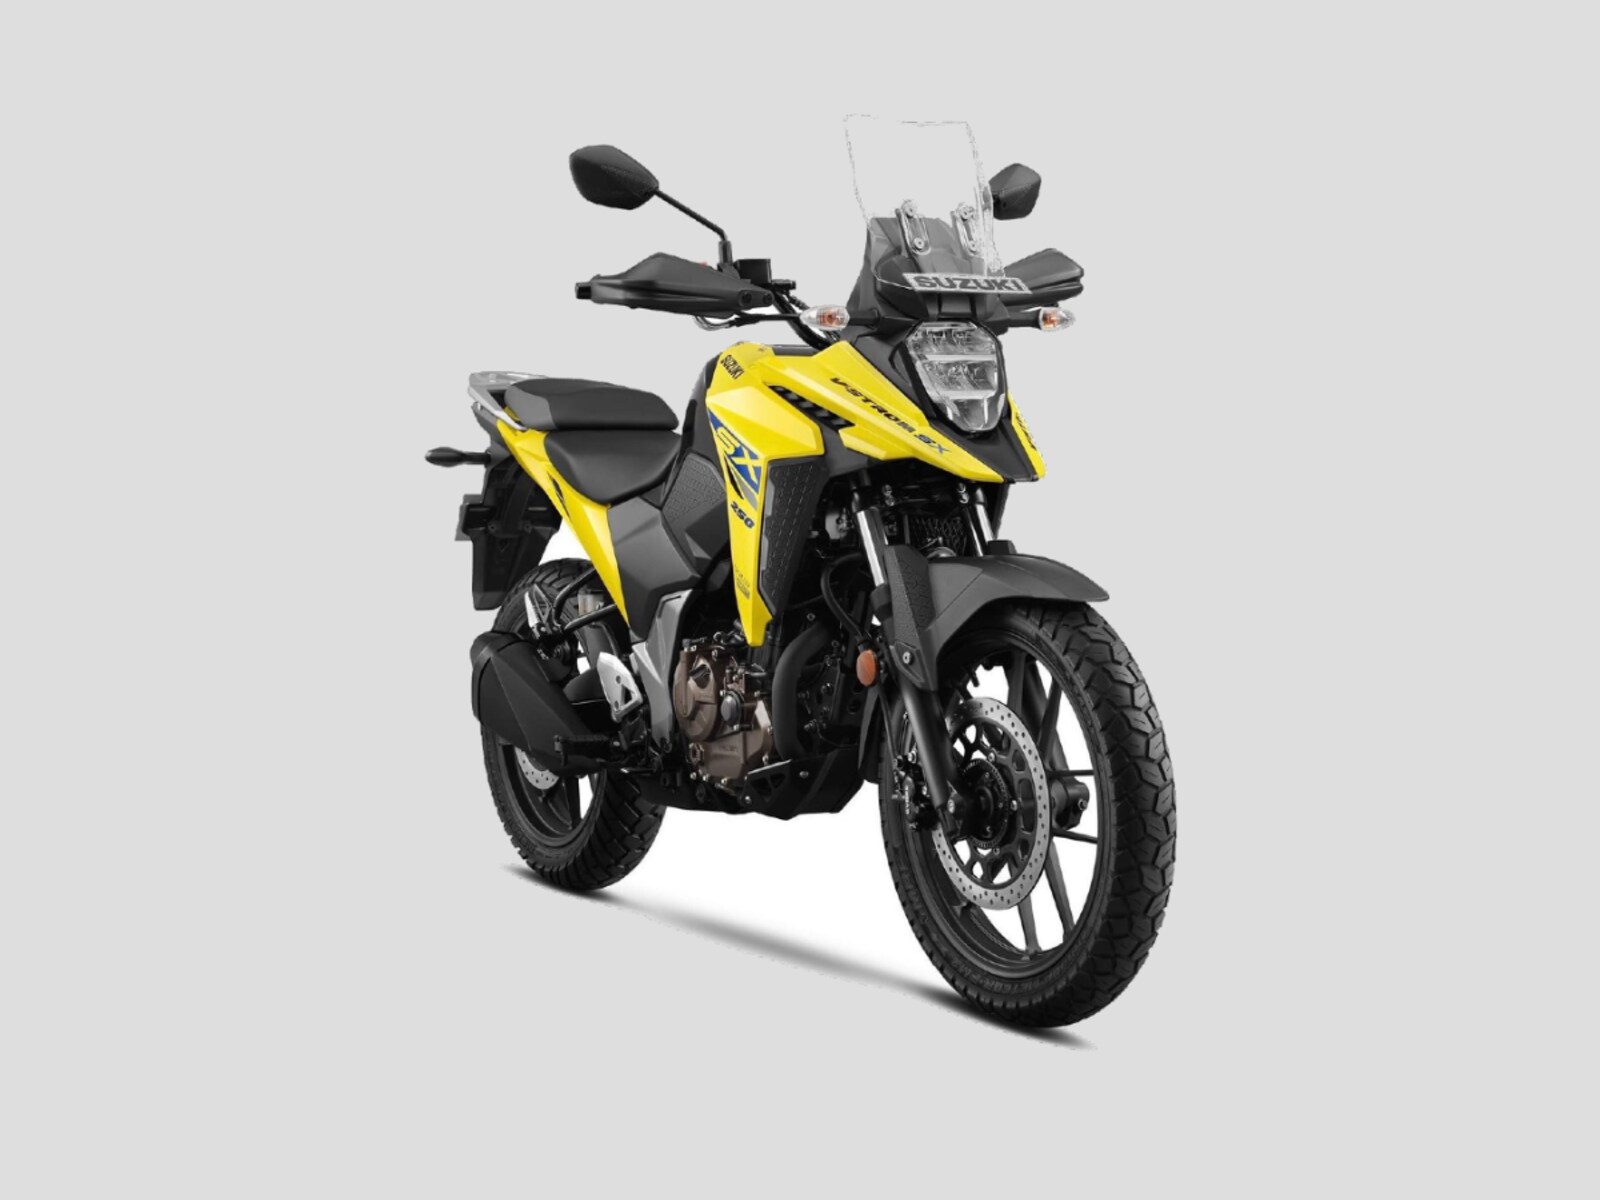 Suzuki V-Strom SX Adventure Motorcycle Launched in India, Price Starts at Rs 2.11 Lakh